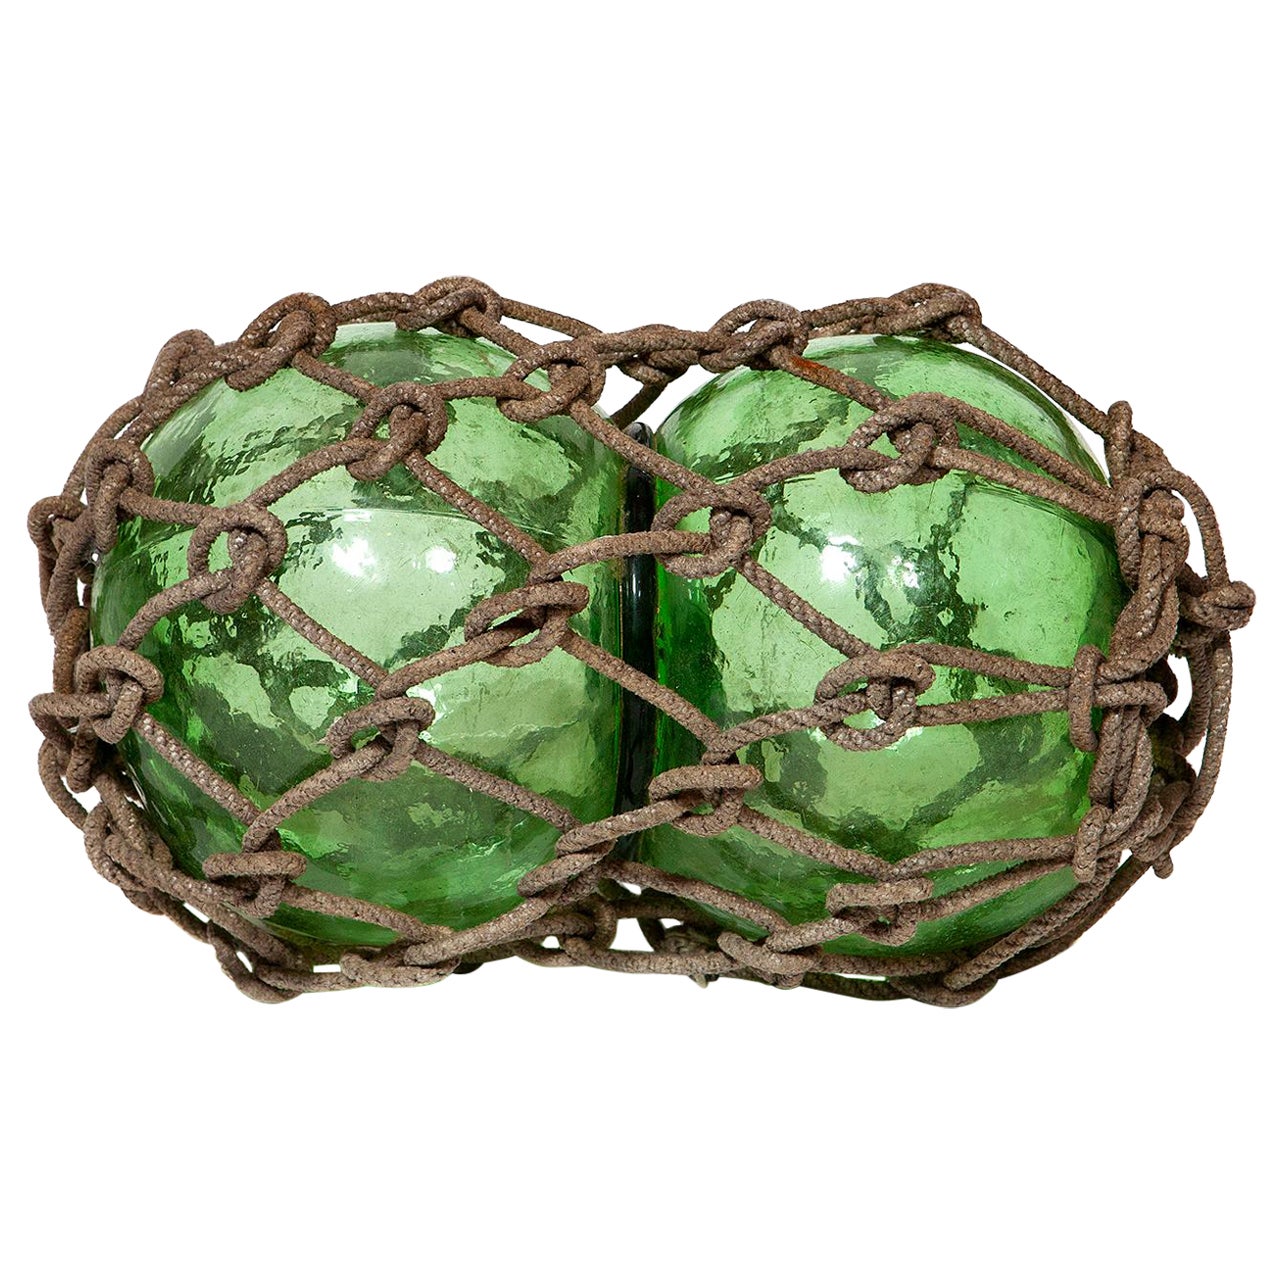  MY SWANKY HOME Reclaimed Antique Glass Green Fishing Float Set  3 Coastal Buoy Decorative Ball : Home & Kitchen